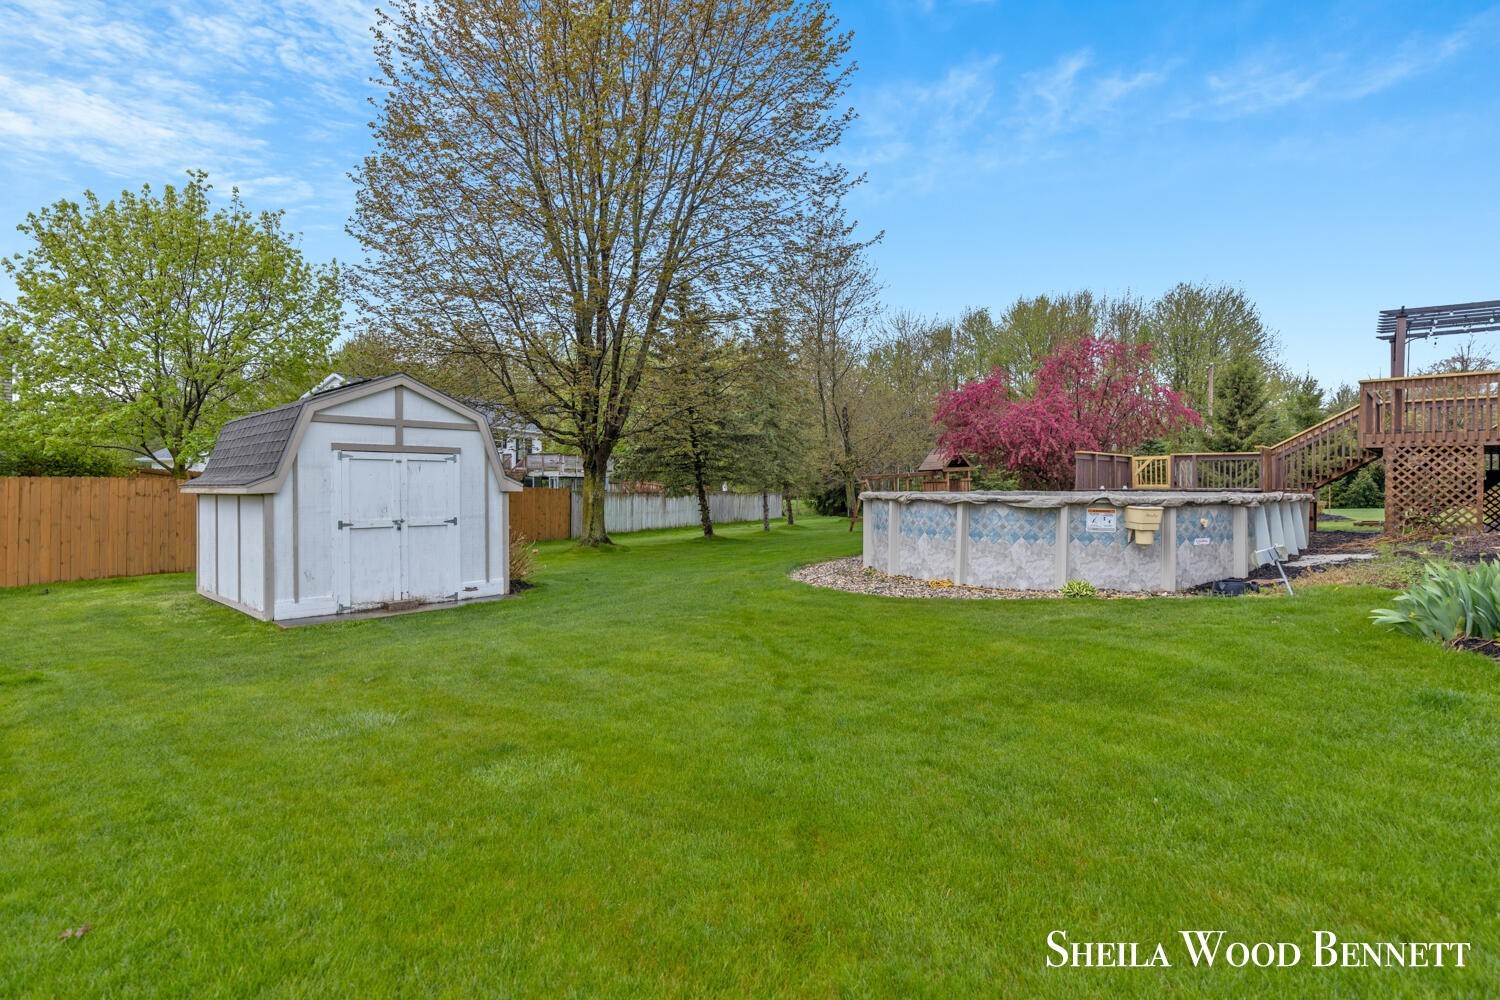 50. 4164 Pintail Court